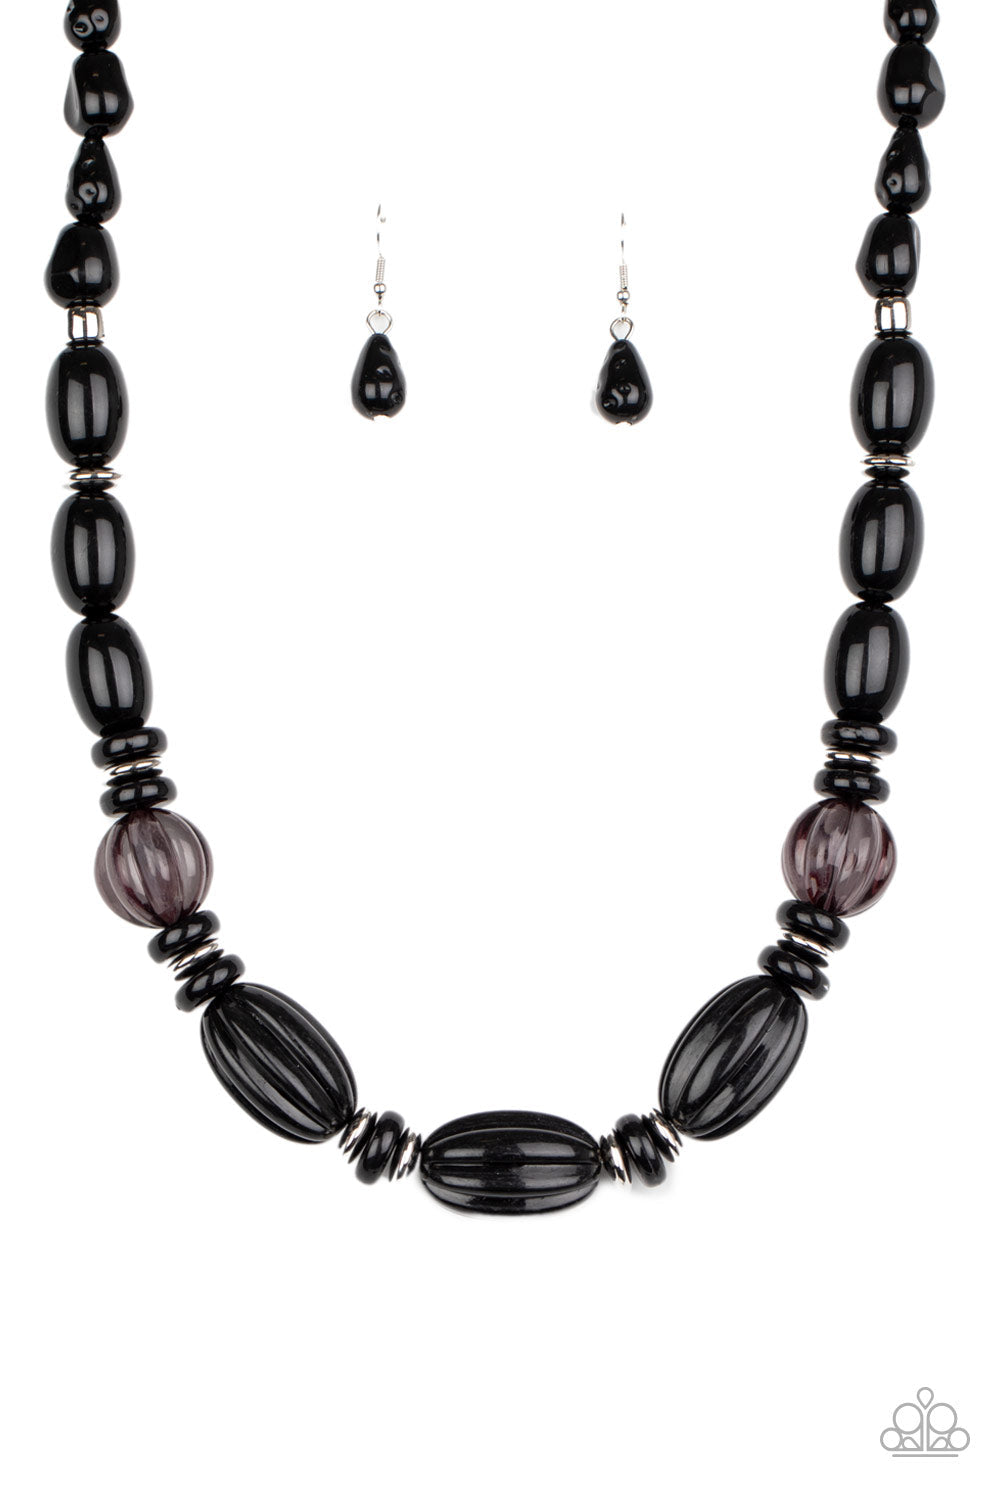 High Alert - Black Bead Necklace - Paparazzi Accessories - Bejeweled Accessories By Kristie - Varying in size and shape, a hearty collection of glassy, hammered, and polished black beads are threaded along an invisible wire below the collar. Dainty silver beads and discs are sprinkled along the colorful collaboration for a shimmery finish. Features an adjustable clasp closure. Sold as one individual necklace.